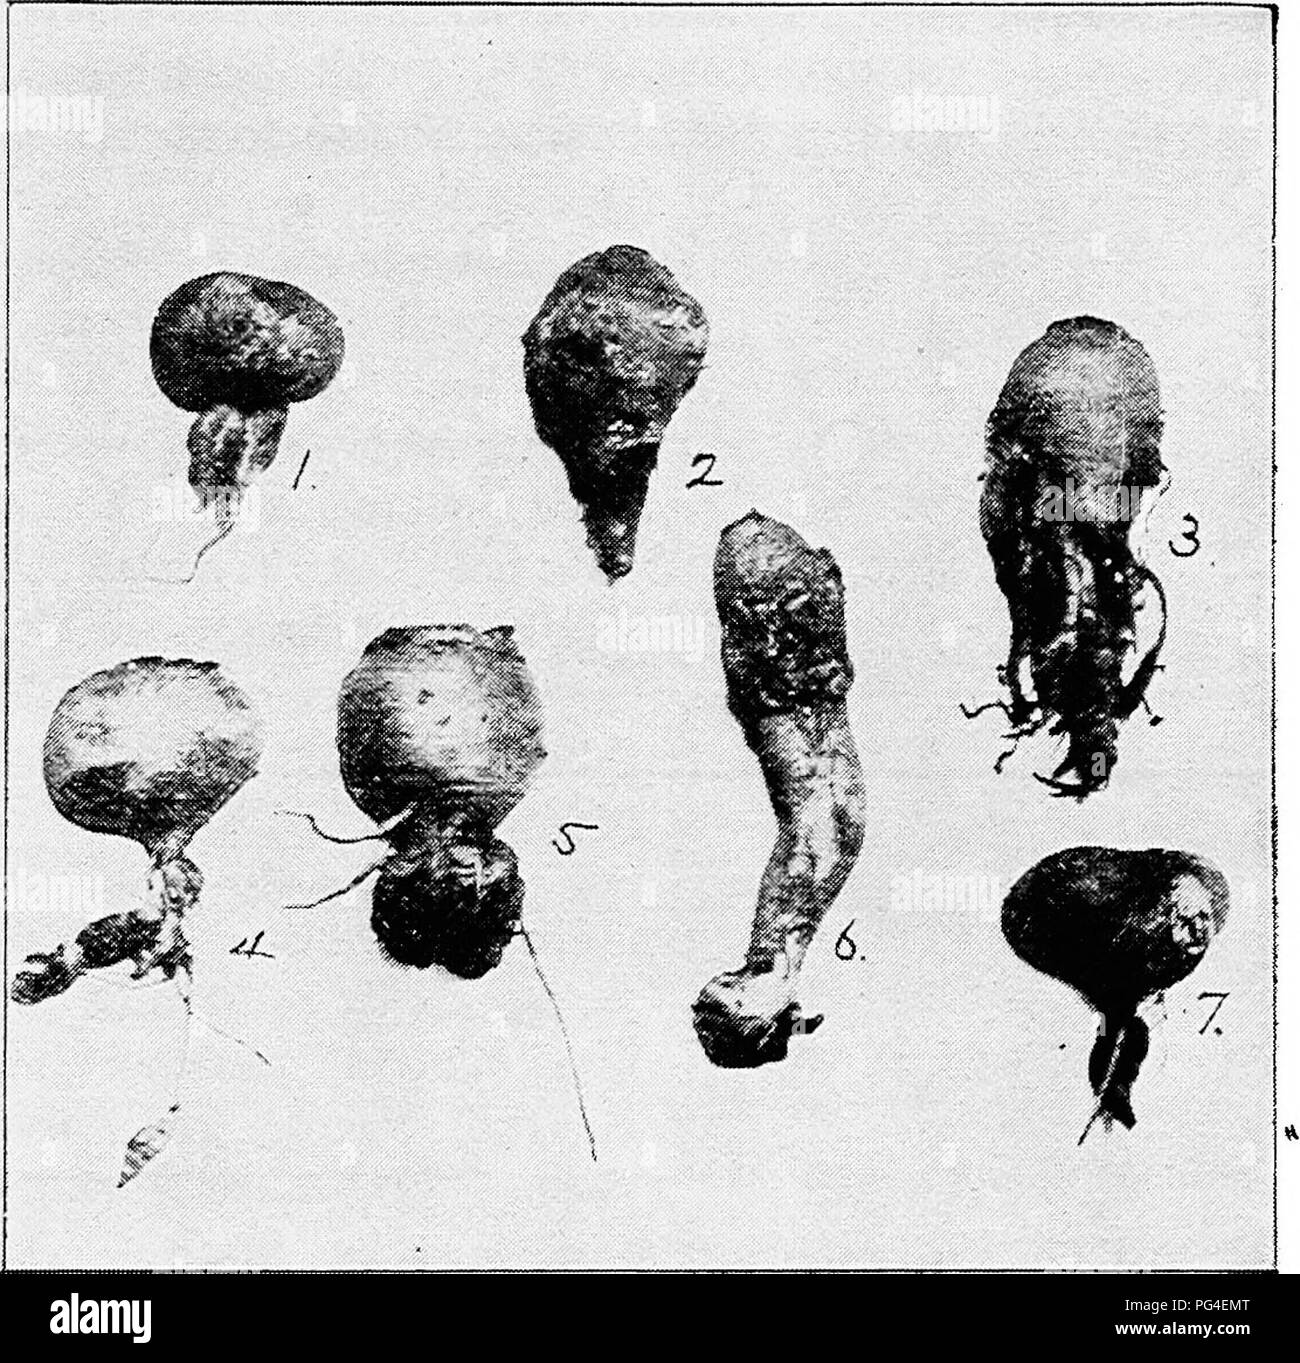 . Minnesota plant diseases. Plant diseases. Minnesota Plant Diseases. 345 Club-root of cabbage, radish, turnip and other cruciferous plants (Plasmodiophora brassicae Wor.). This disease is not un- common in Minnesota but the exact extent of its distribution is not known. The cause of the disease is not a true fungus but is a slime mold or fungus animal. It forms no fungus threads but produces spores somewhat similar to those of the true fungi. The spores gain entrance to the host plant, usually in the root region though the parasite may also exist in the leaf.. Fig. 179.—Club-root of turnips.  Stock Photo